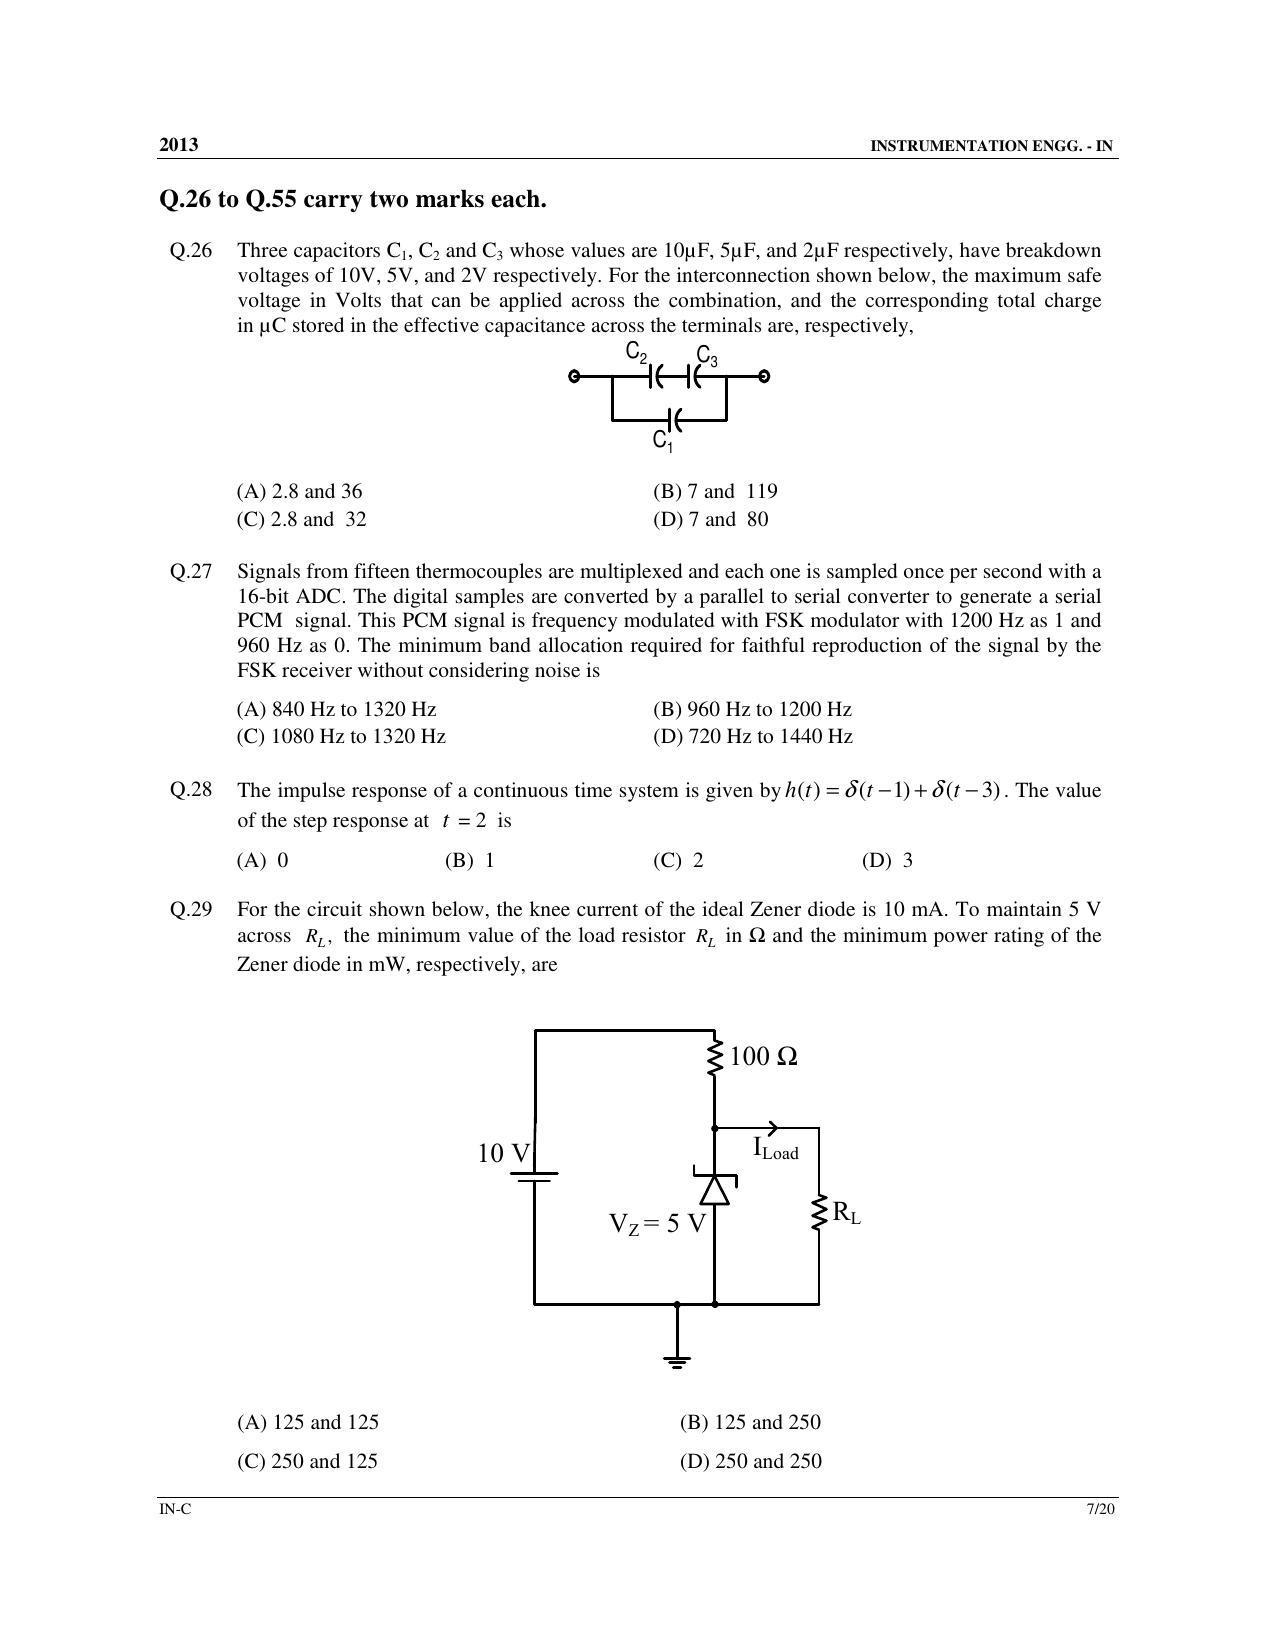 GATE 2013 Instrumentation Engineering (IN) Question Paper with Answer Key - Page 42